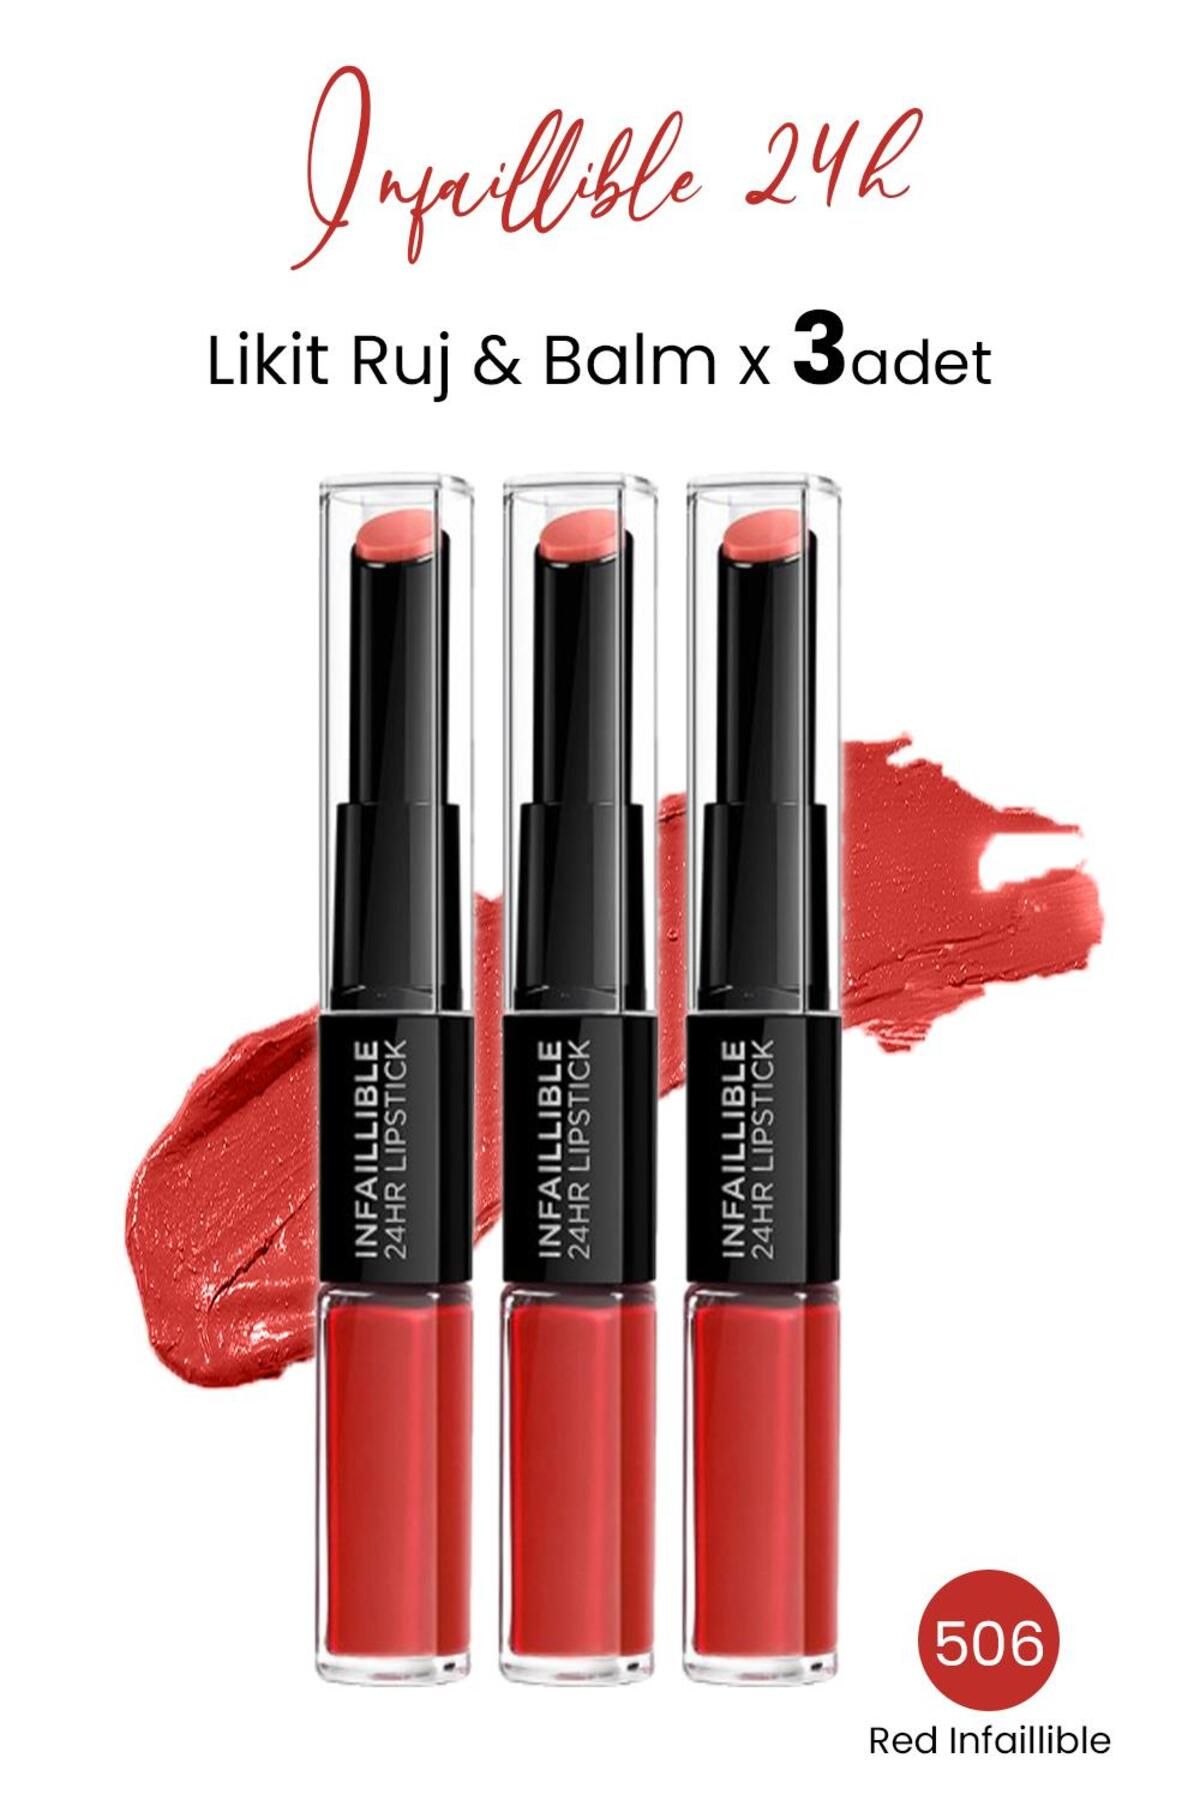 L'Oreal Paris Infaillible 24h Likit Ruj & Balm 506 Red Infaillible X 3 Adet